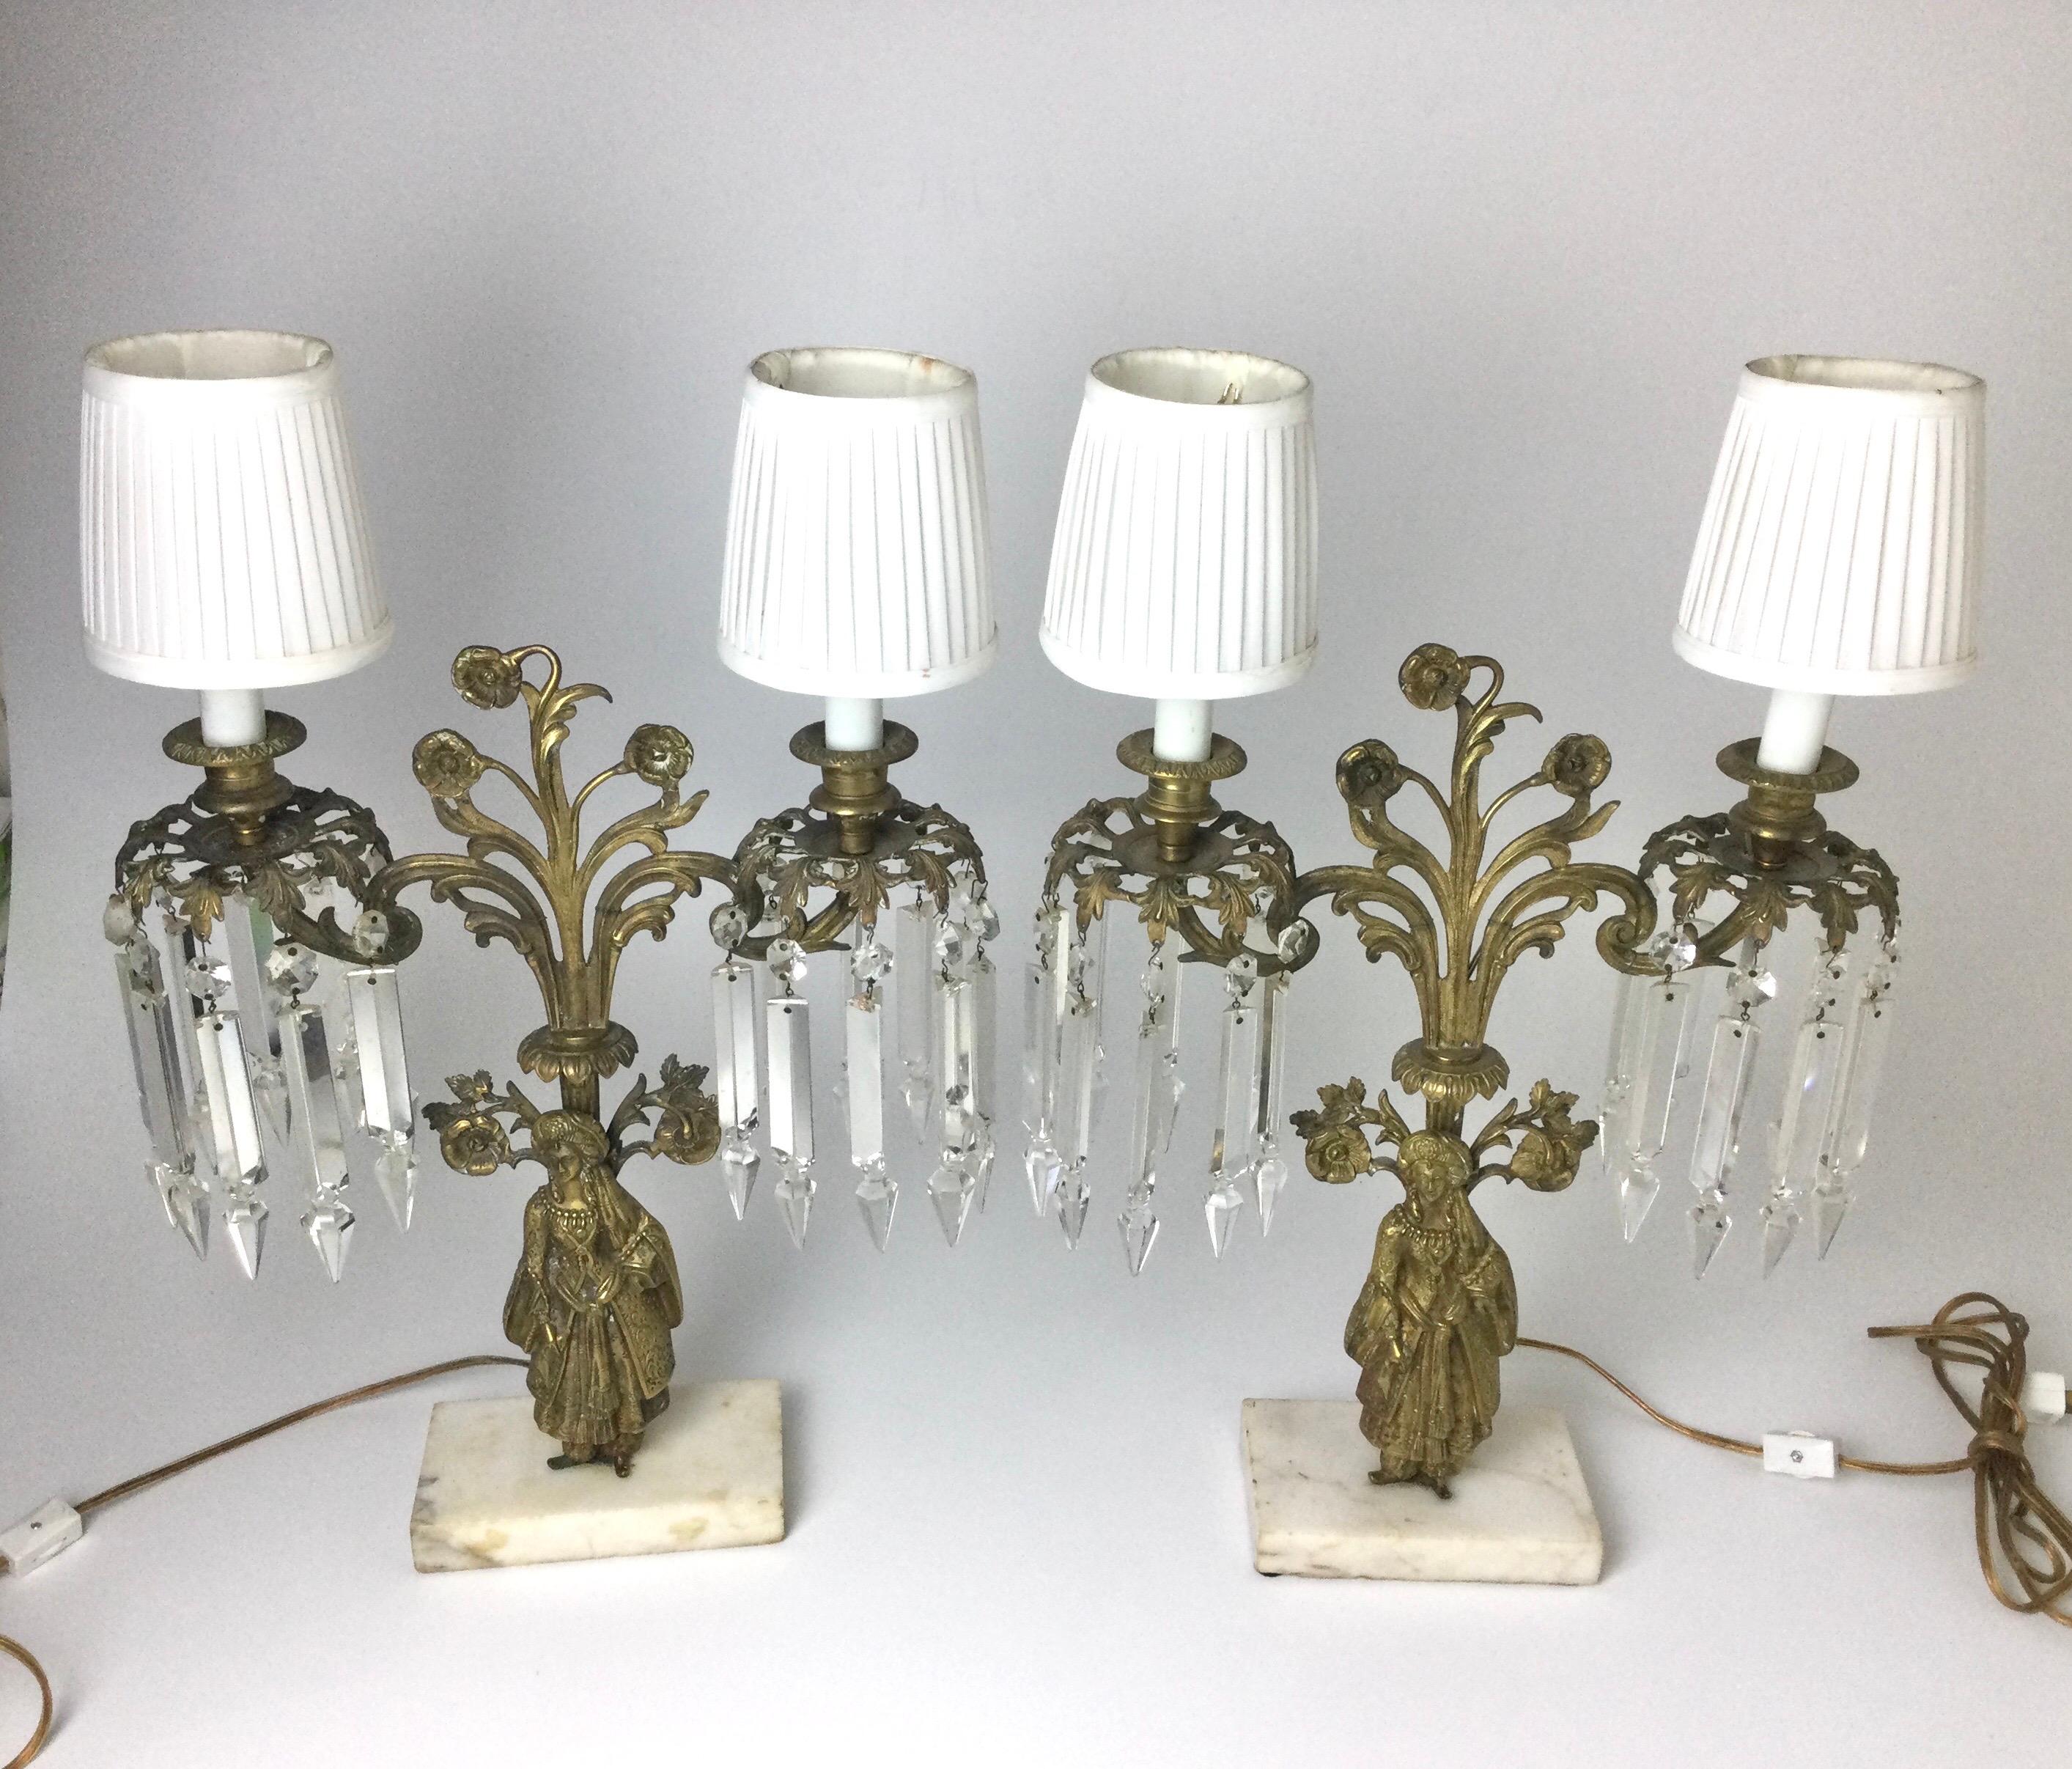 Nice old pair of candelabra that have been electrified. In good working order. Some small chipping to the prisms and 2 have been replaced. Come with the shades. Note minor staining to shades. Measures: 20